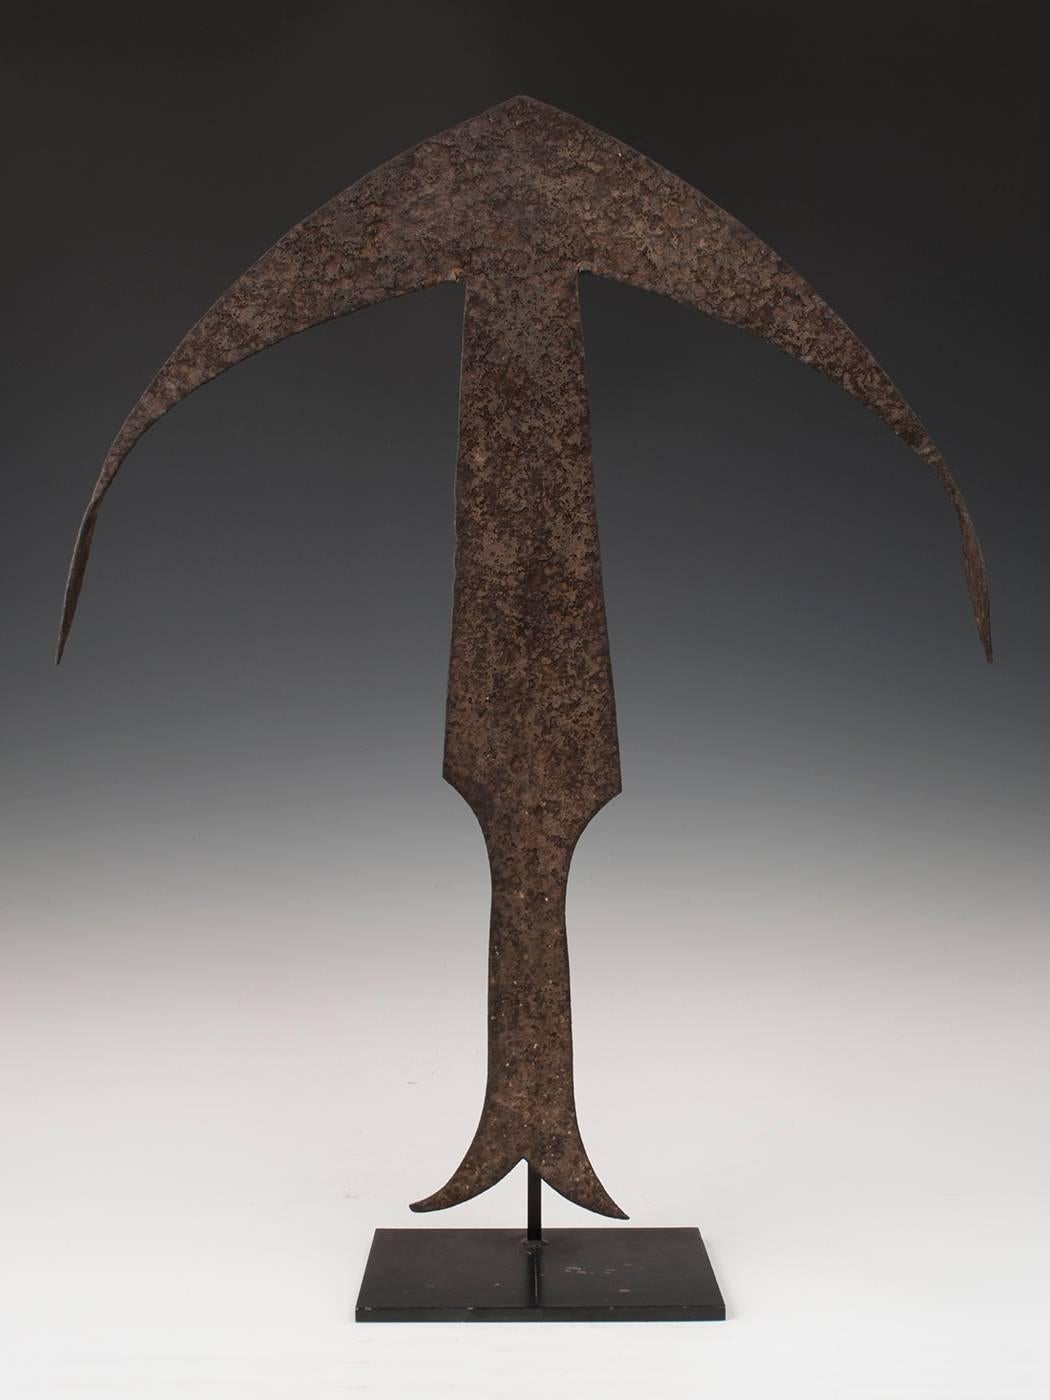 Early to mid-20th century tribal iron anchor currency, Gabon/ D.R. Congo

From the Kwele people of Gabon/Democratic Republic of Congo, these anchor-like currencies, called zong, were inspired by a crossbow and mandjong. Beautiful aged iron patina.


